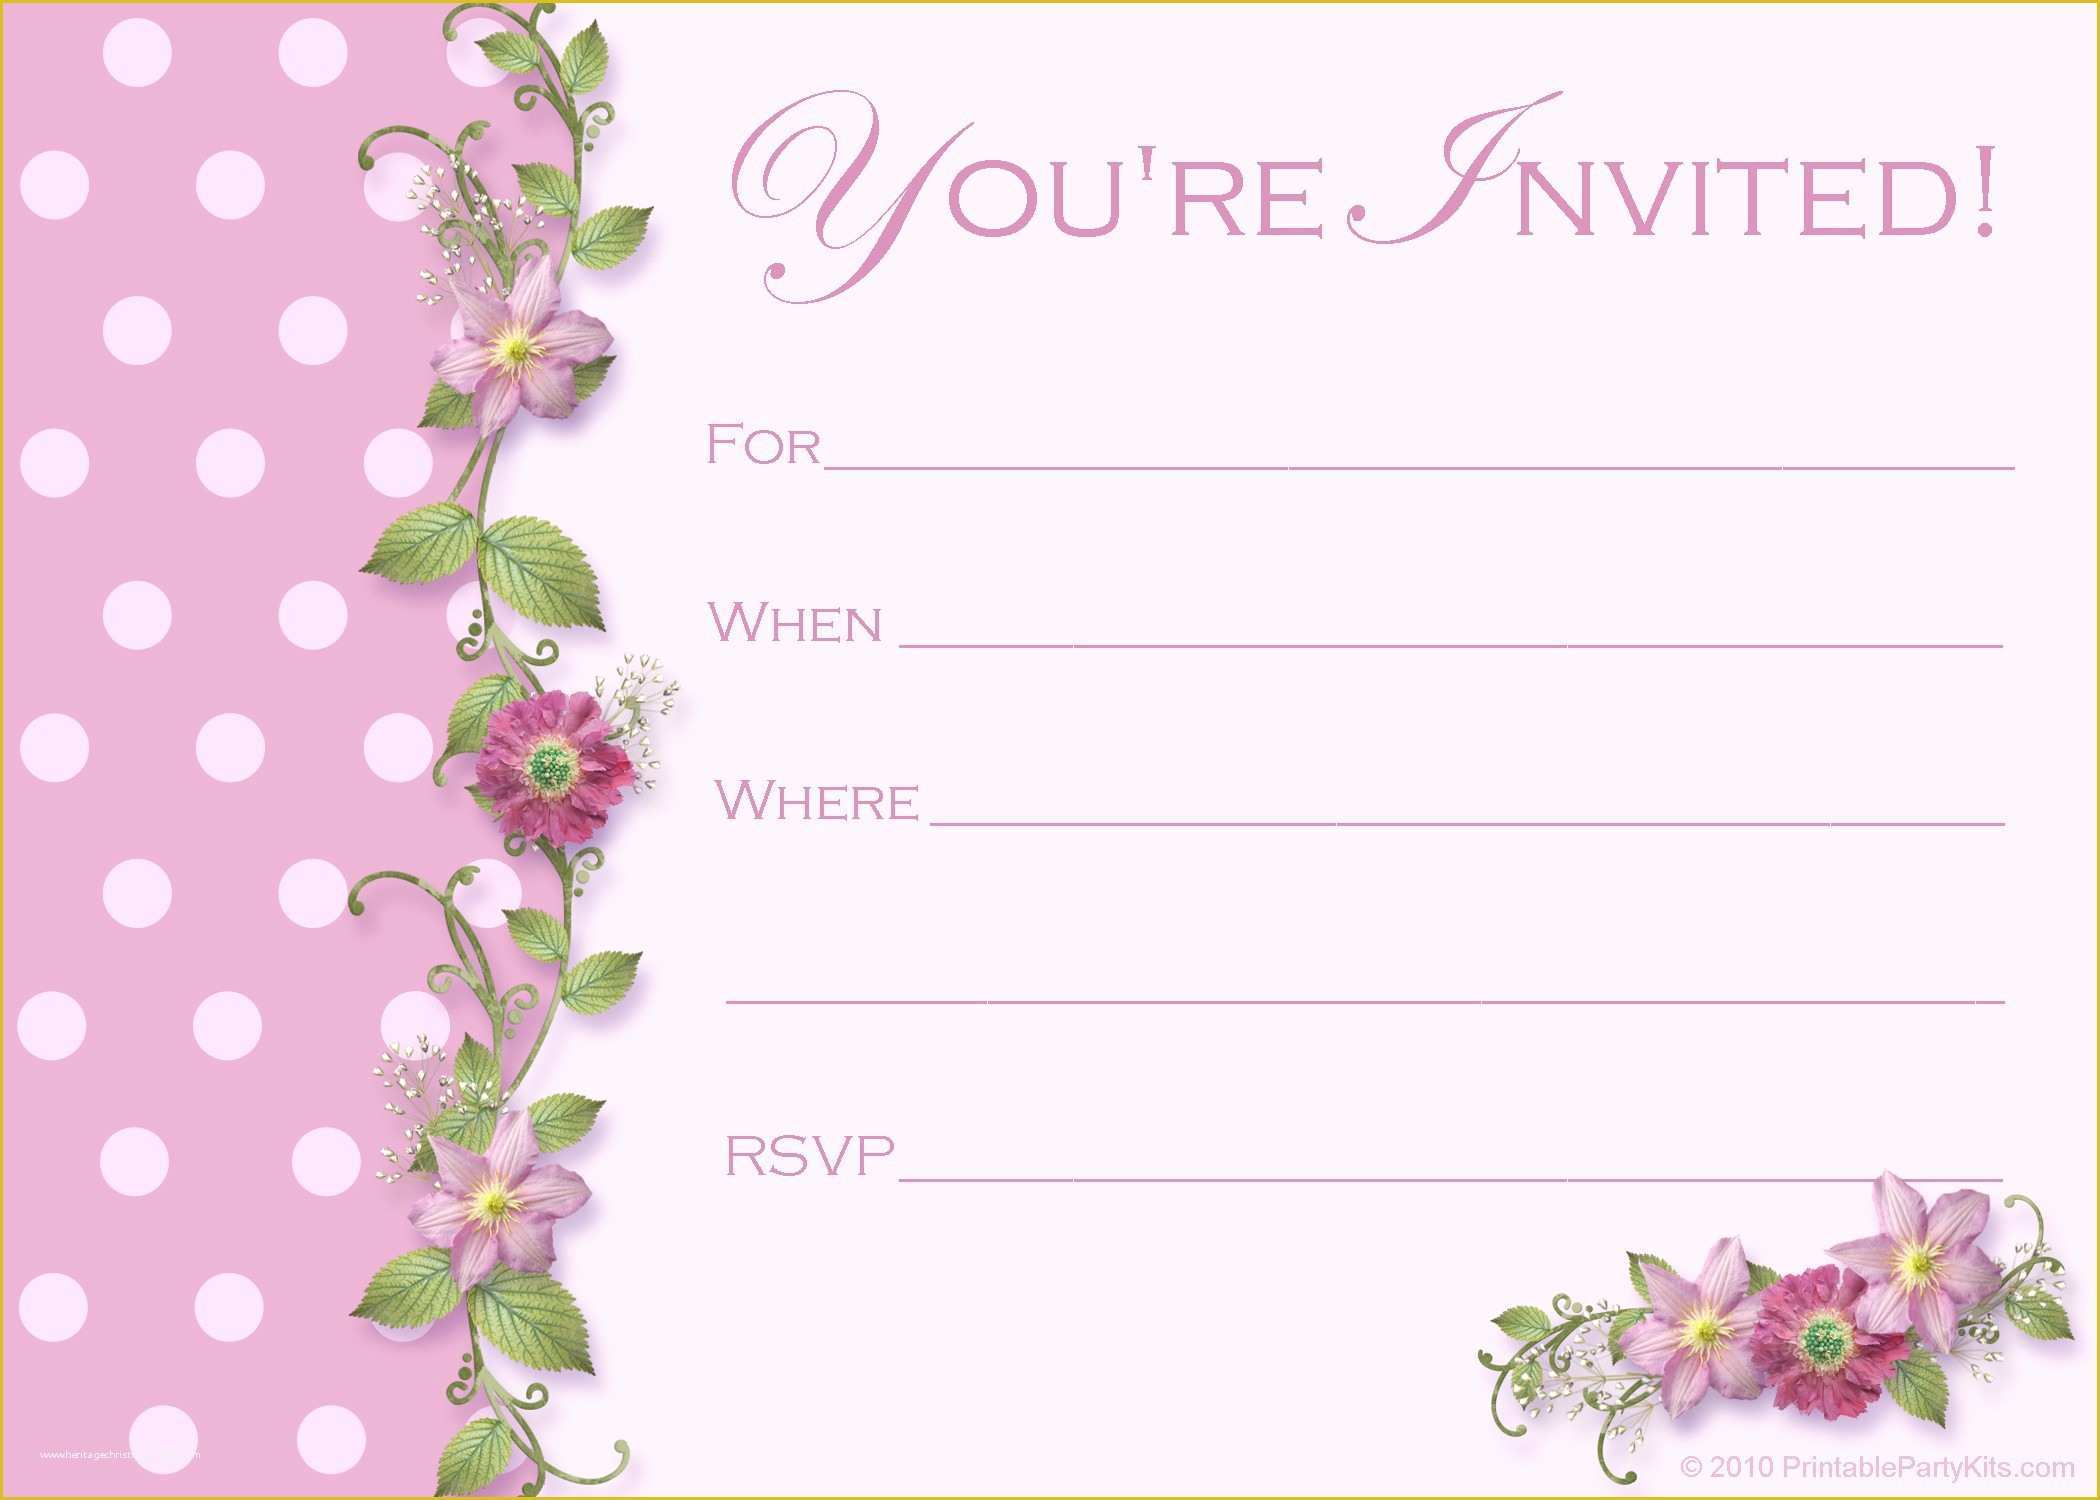 Dinner Invitation Templates Free Download Of Free Printable Party Invitations Templates